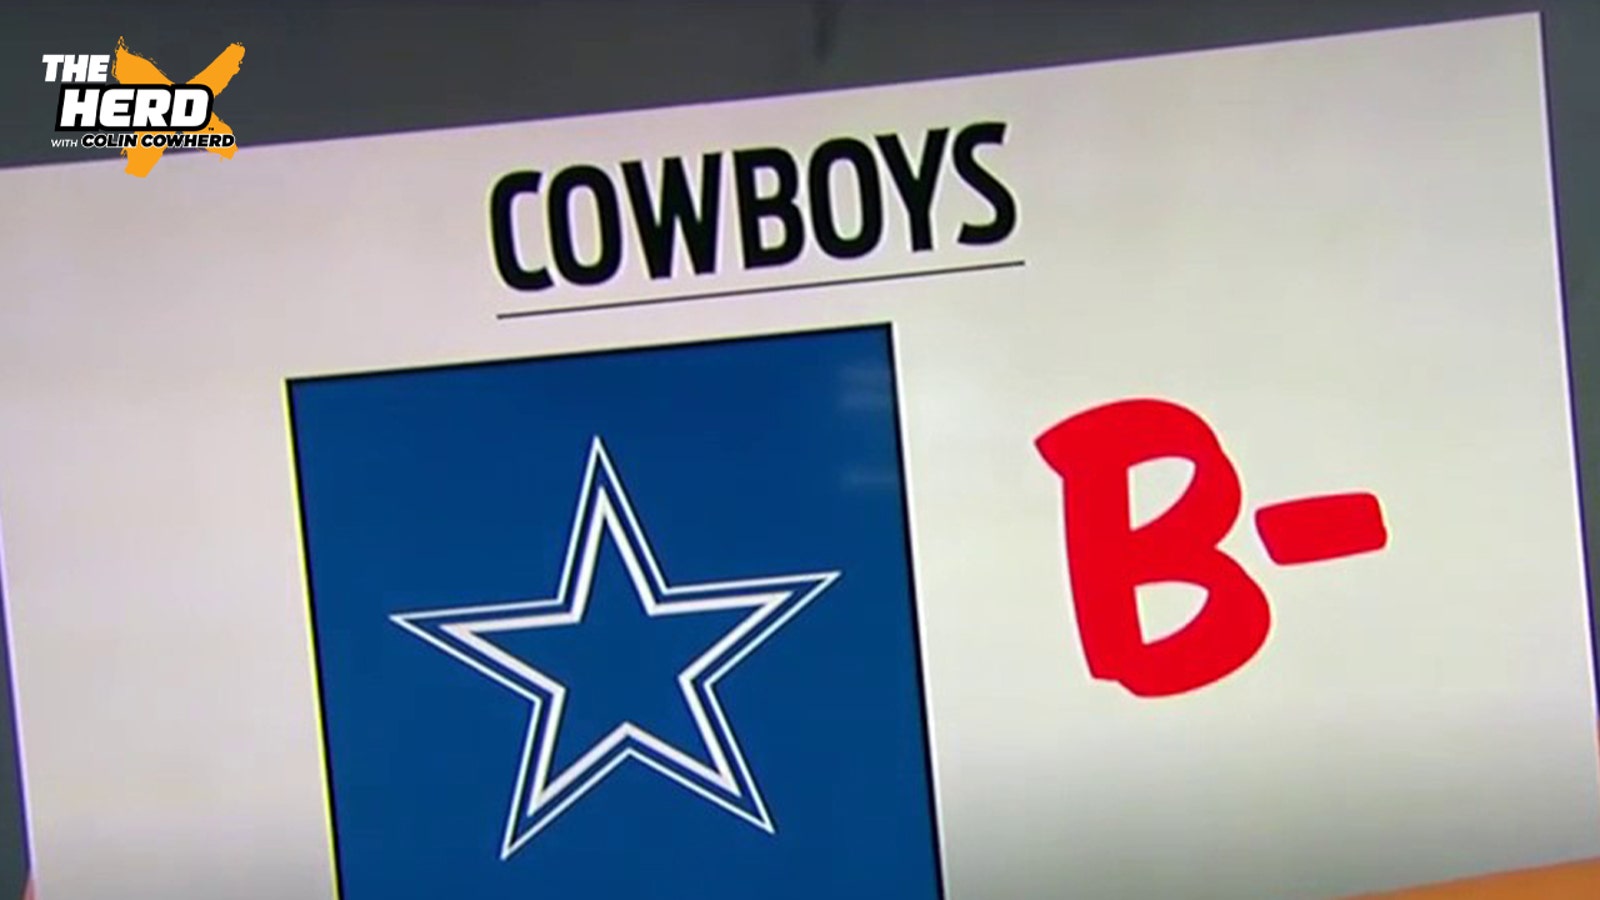 Colin Cowherd hands out divisional round grades for each team